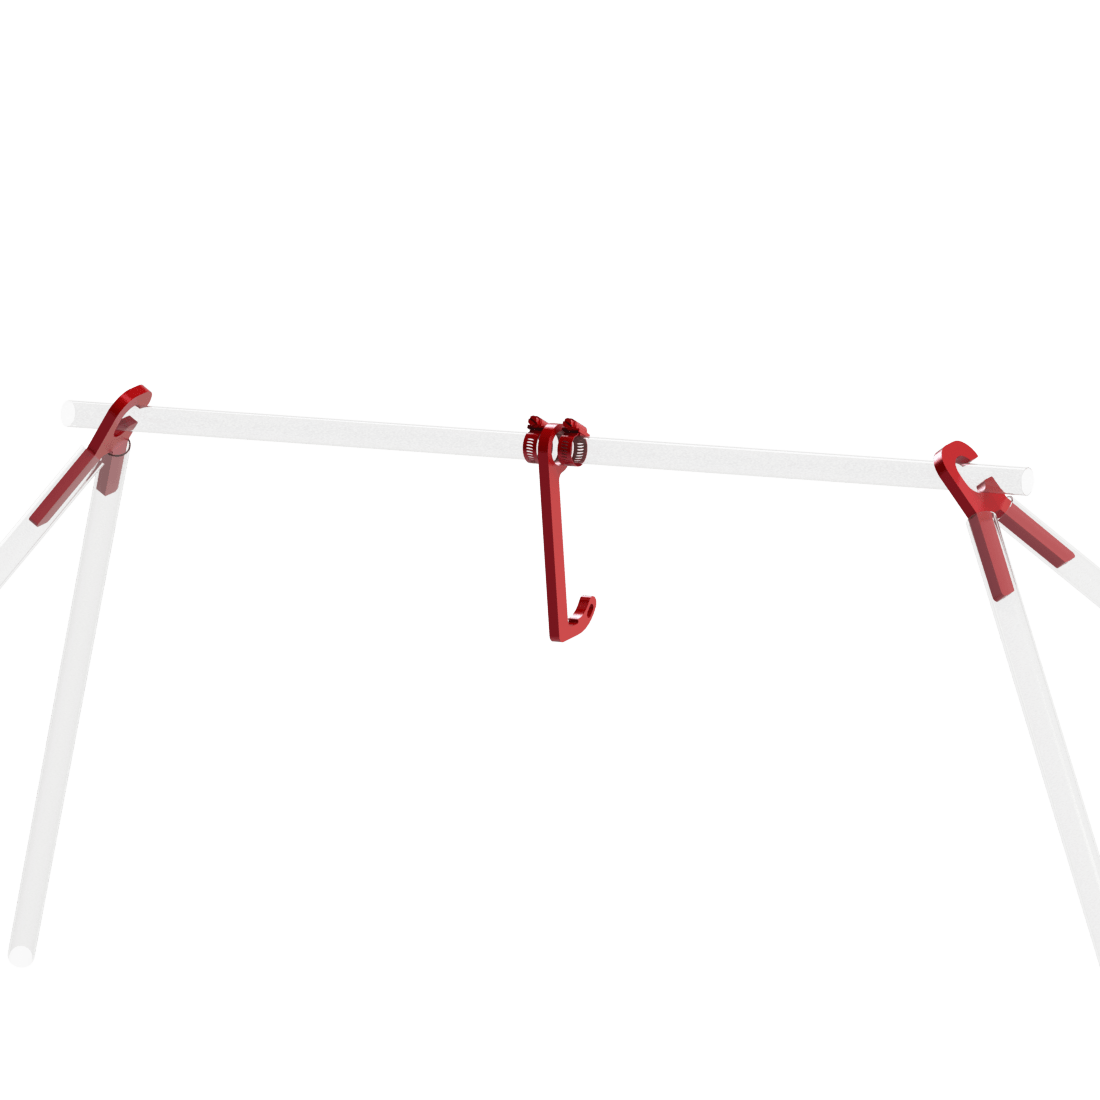 Gong Hanger Kit - Single or Double Hooks (Parts shown in red)